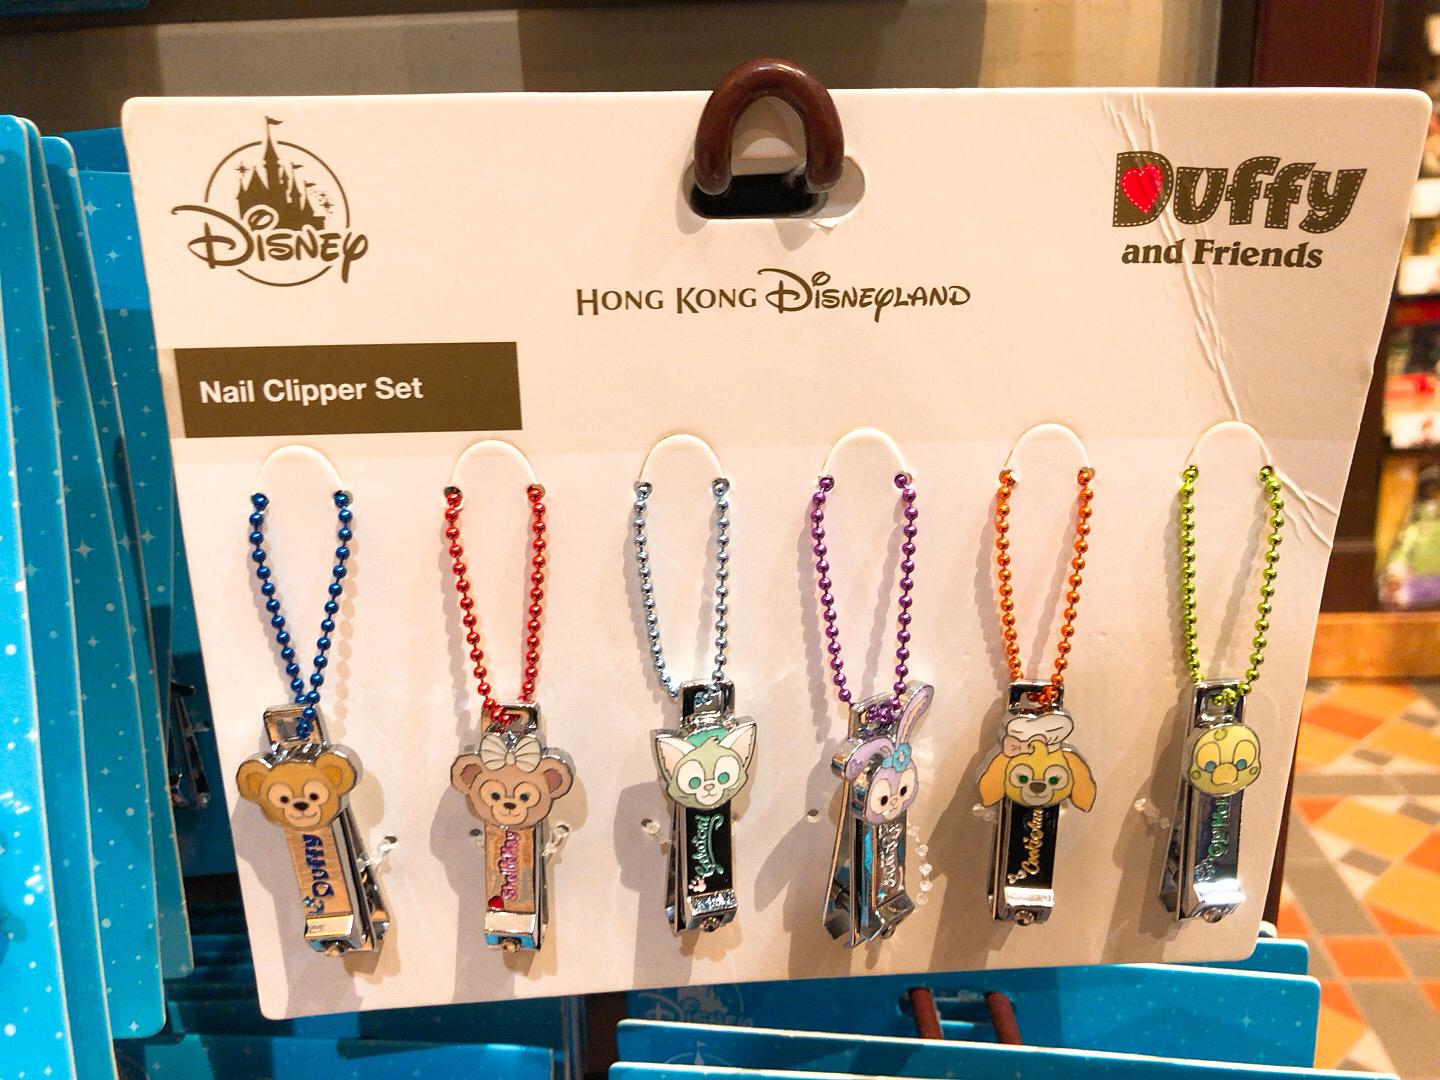 HKDL - Nail Clipper set - Duffy and friends